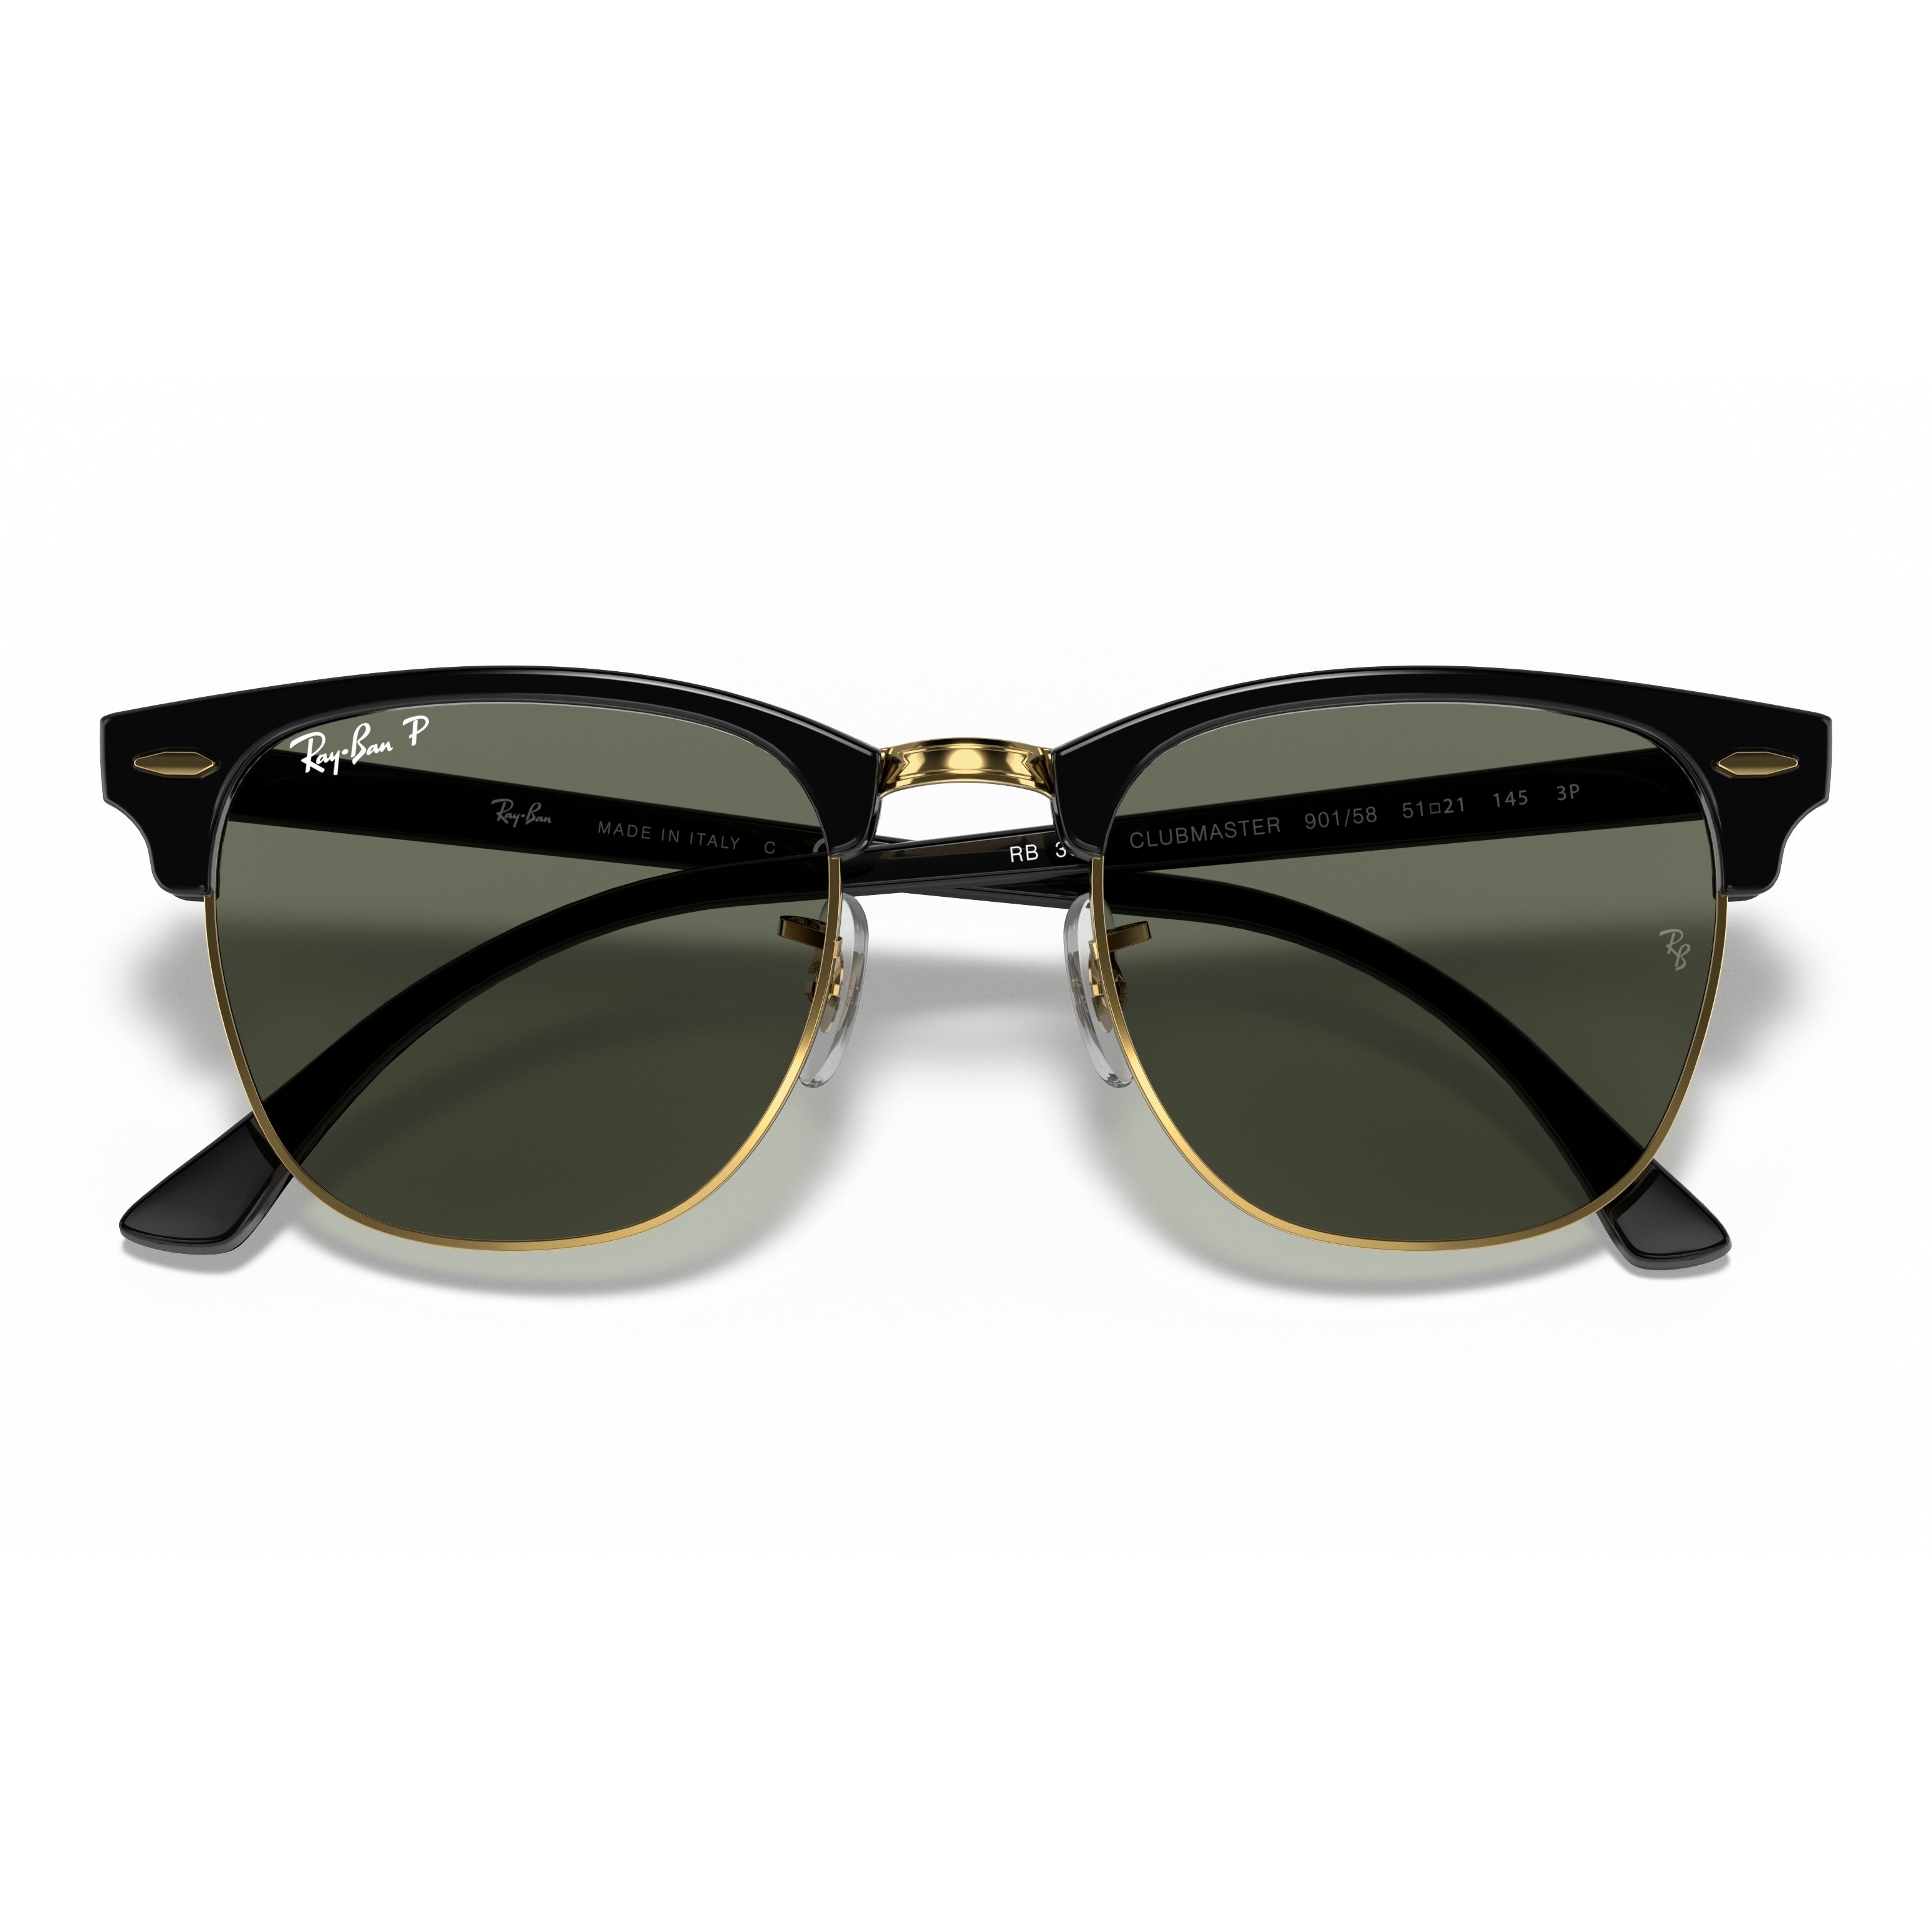 Ray-Ban Ray-Ban Clubmaster Classic Green Classic G-15 Square Unisex Sunglasses RB3016 901/58 49